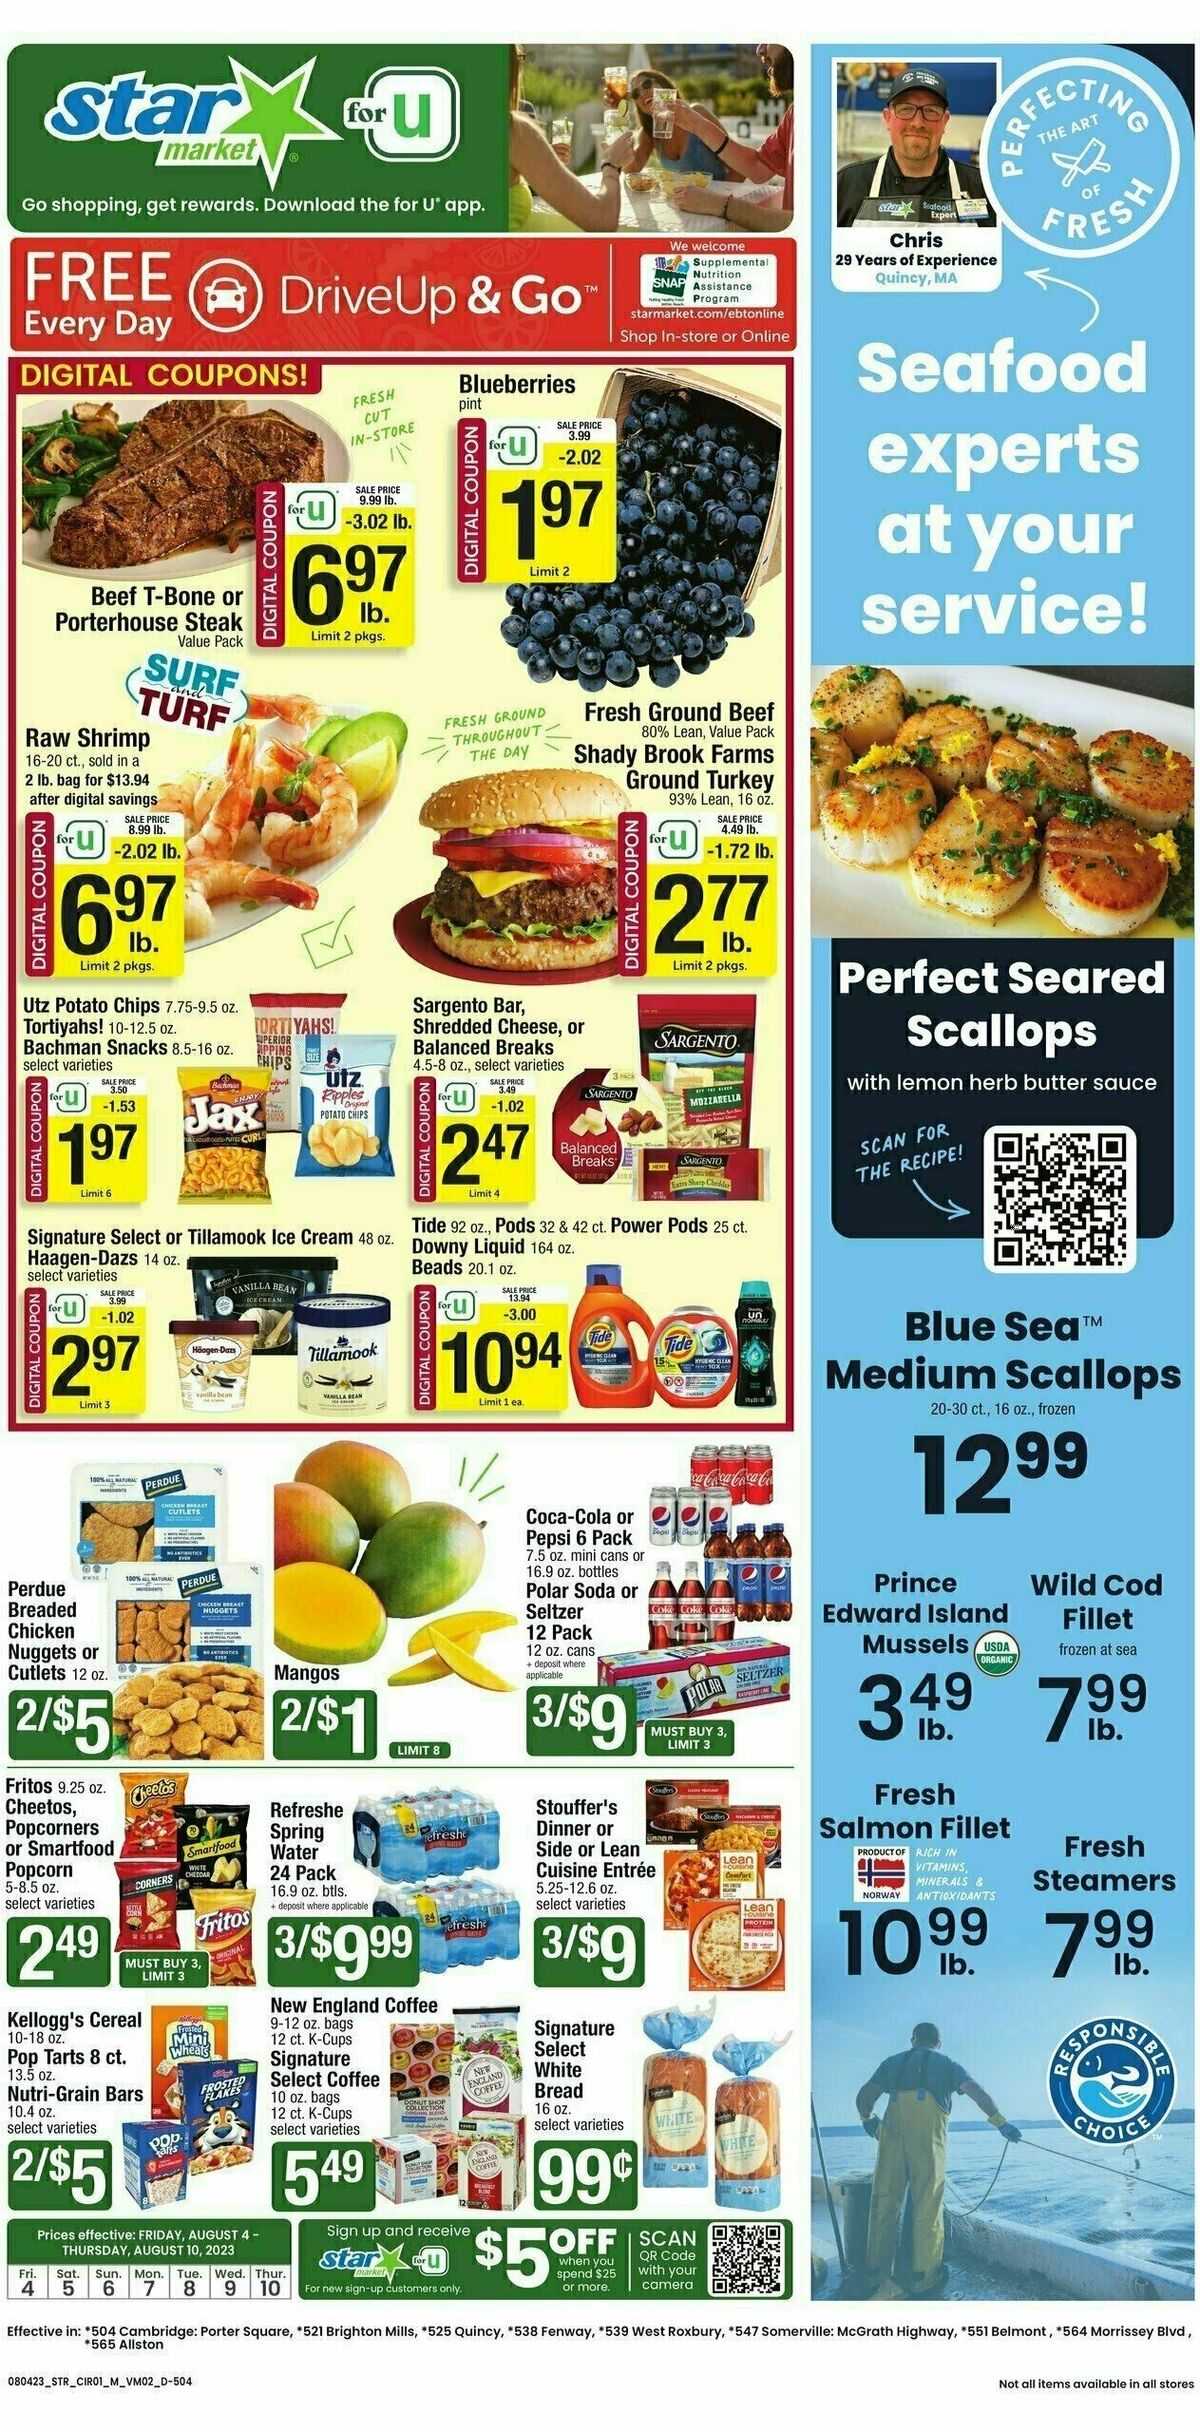 Star Market Weekly Ad from August 4